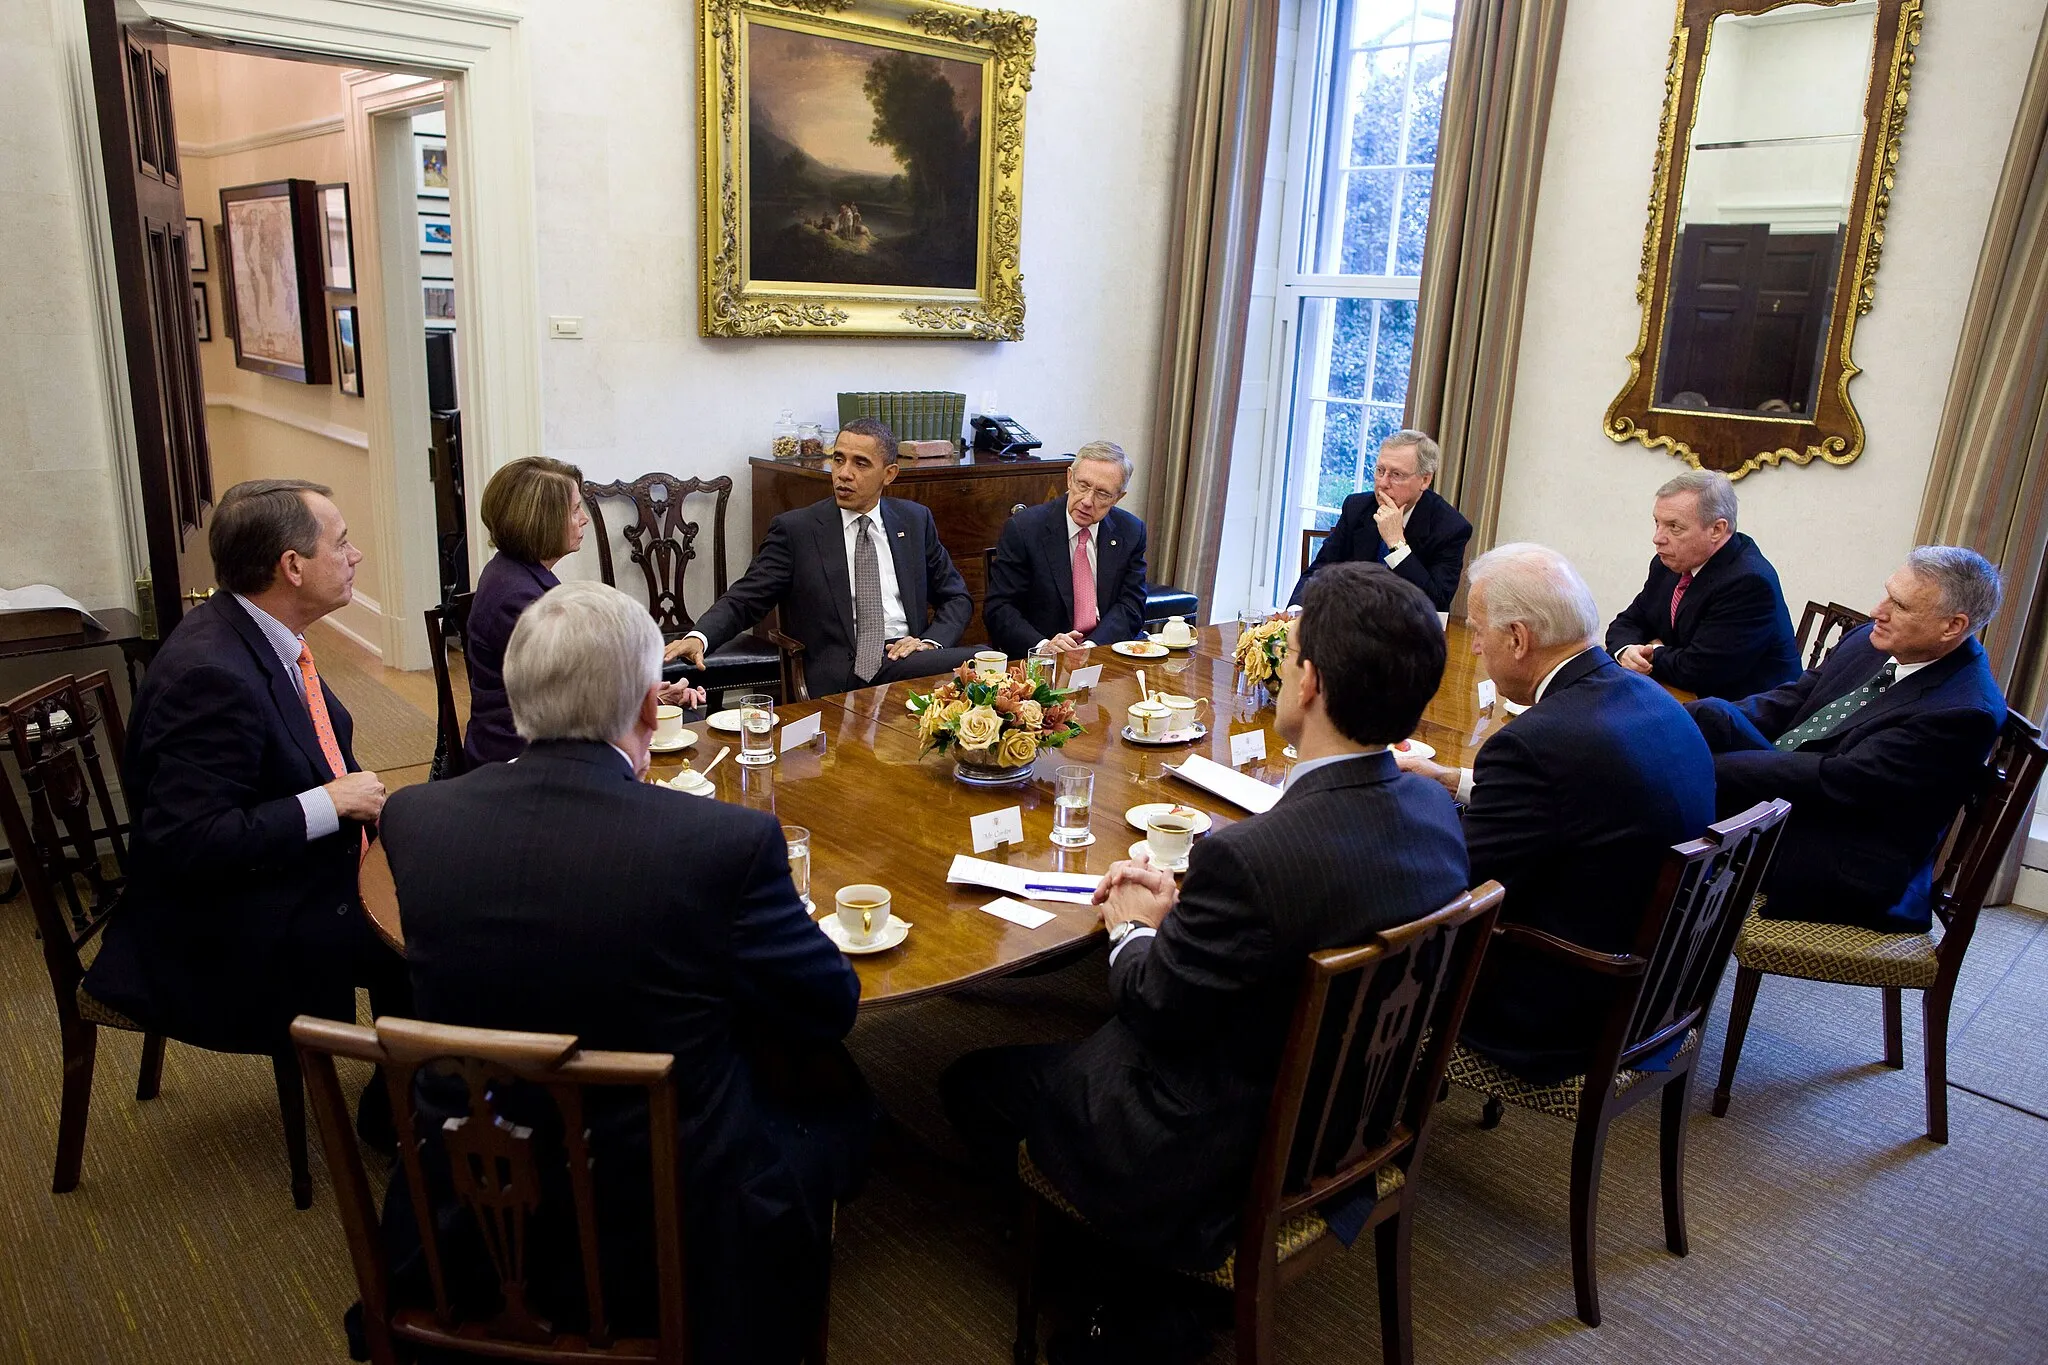 Photo showing: President Barack Obama and Vice President Joe Biden meet with bipartisan Congressional leadership in the Oval Office Private Dining Room, Nov. 30, 2010.  Attending the meeting, clockwise from President Obama are: Sen. Harry Reid, D-Nev., Majority Leader; Sen. Mitch McConnell, R-Ky., Republican Leader; Sen. Dick Durbin, D-Ill., Assistant Majority Leader; Sen. Jon Kyl, R-Ariz., Republican Whip; Vice President Biden, Rep. Eric Cantor, R-Va., Republican Whip; Rep. Steny Hoyer, D-Md., Majority Leader; Rep. John Boehner, R-Ohio, Republican Leader; and Speaker Nancy Pelosi, D-Calif. (Official White House Photo by Pete Souza)